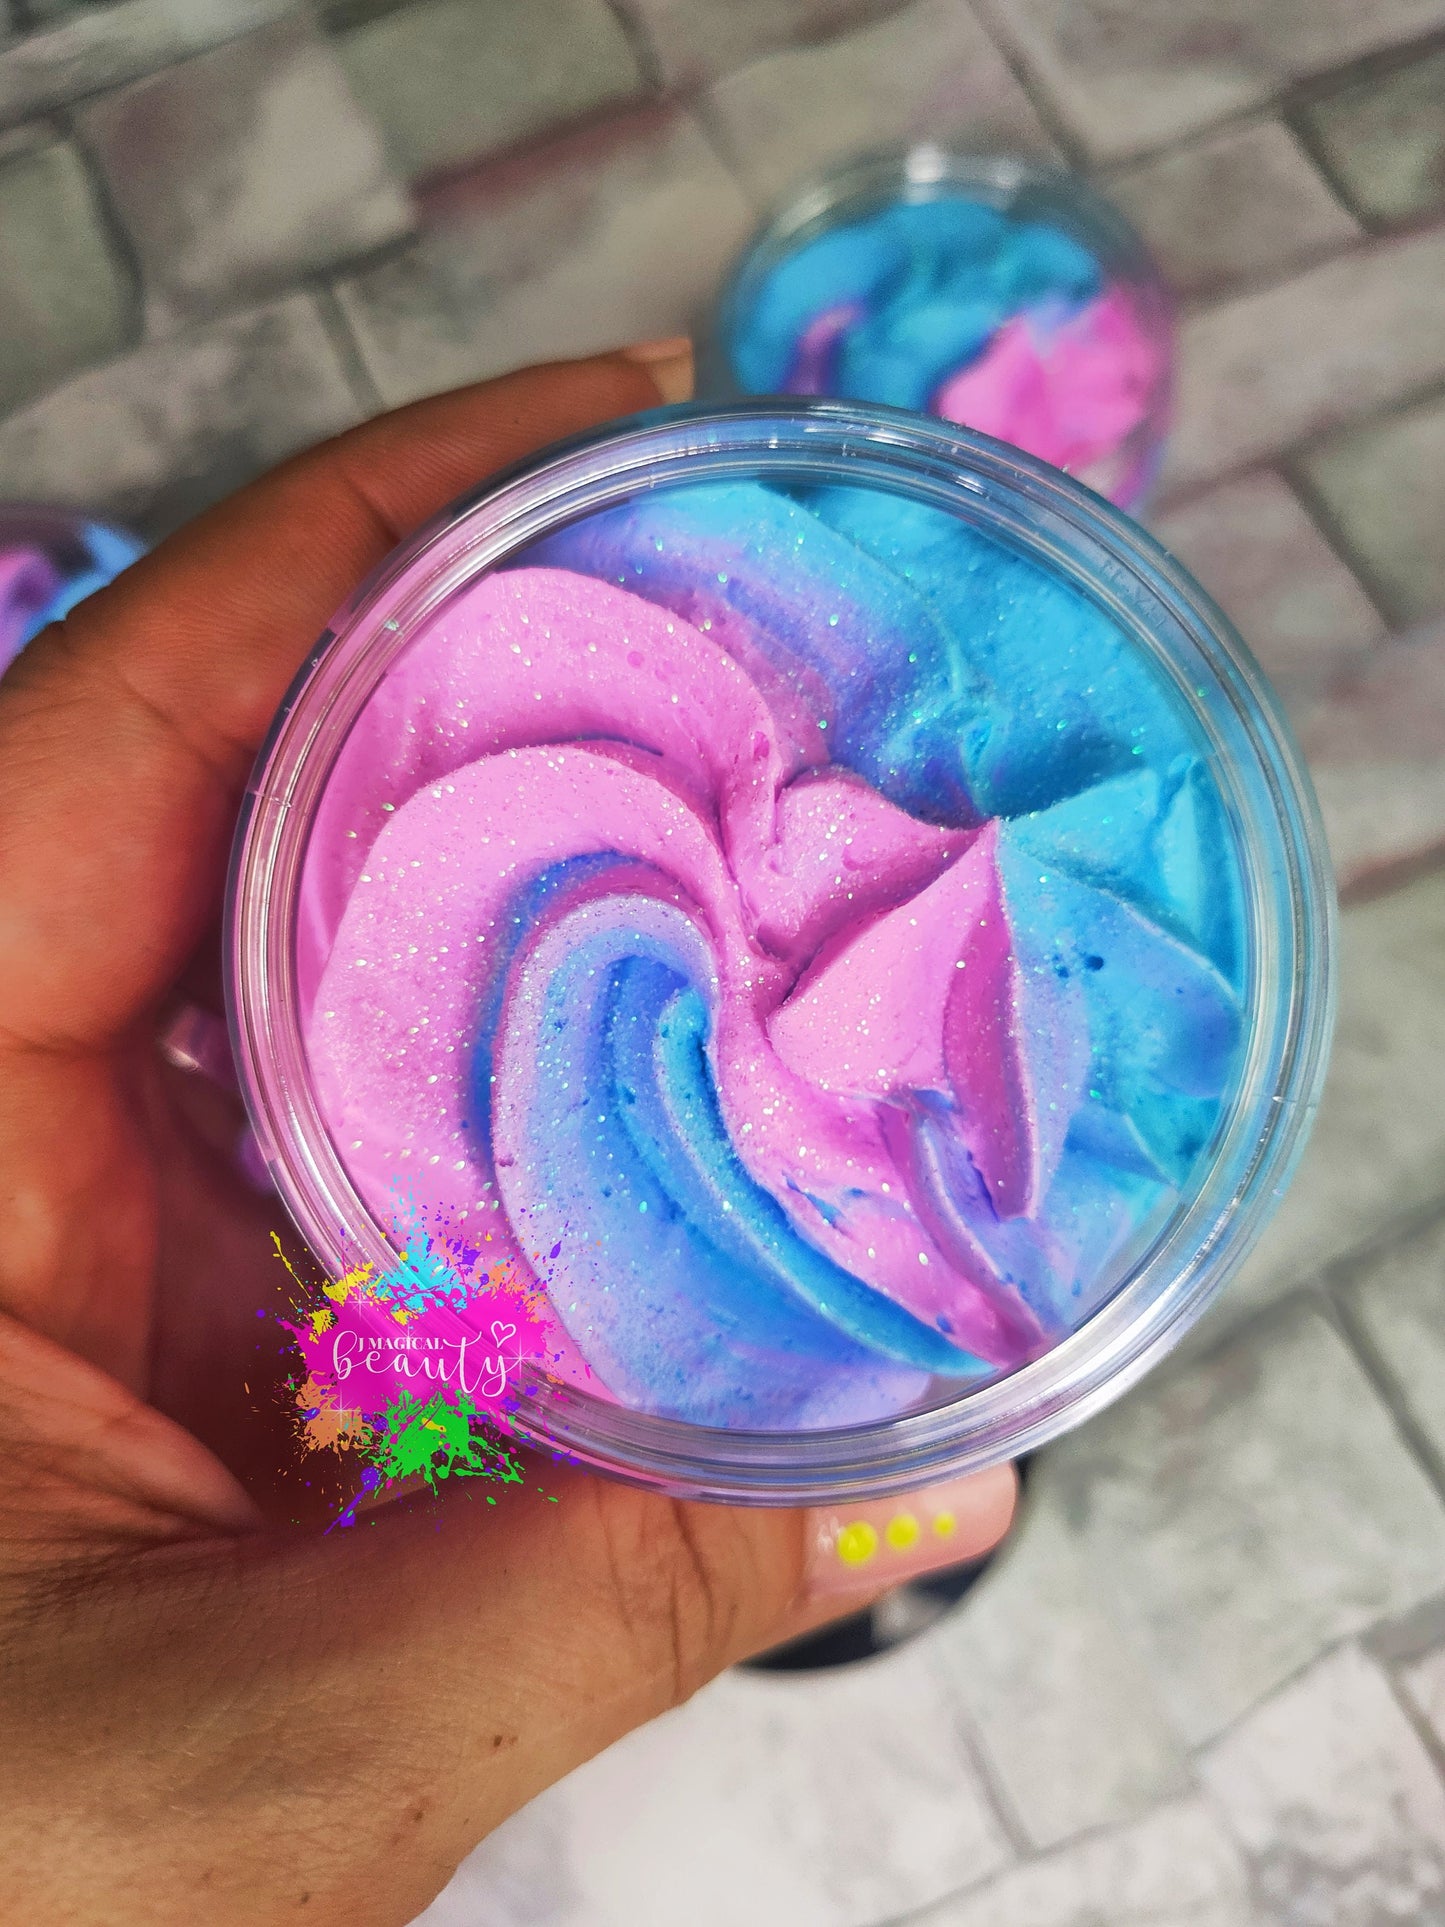 Whipped Soap Marshmallow Candy Floss scent